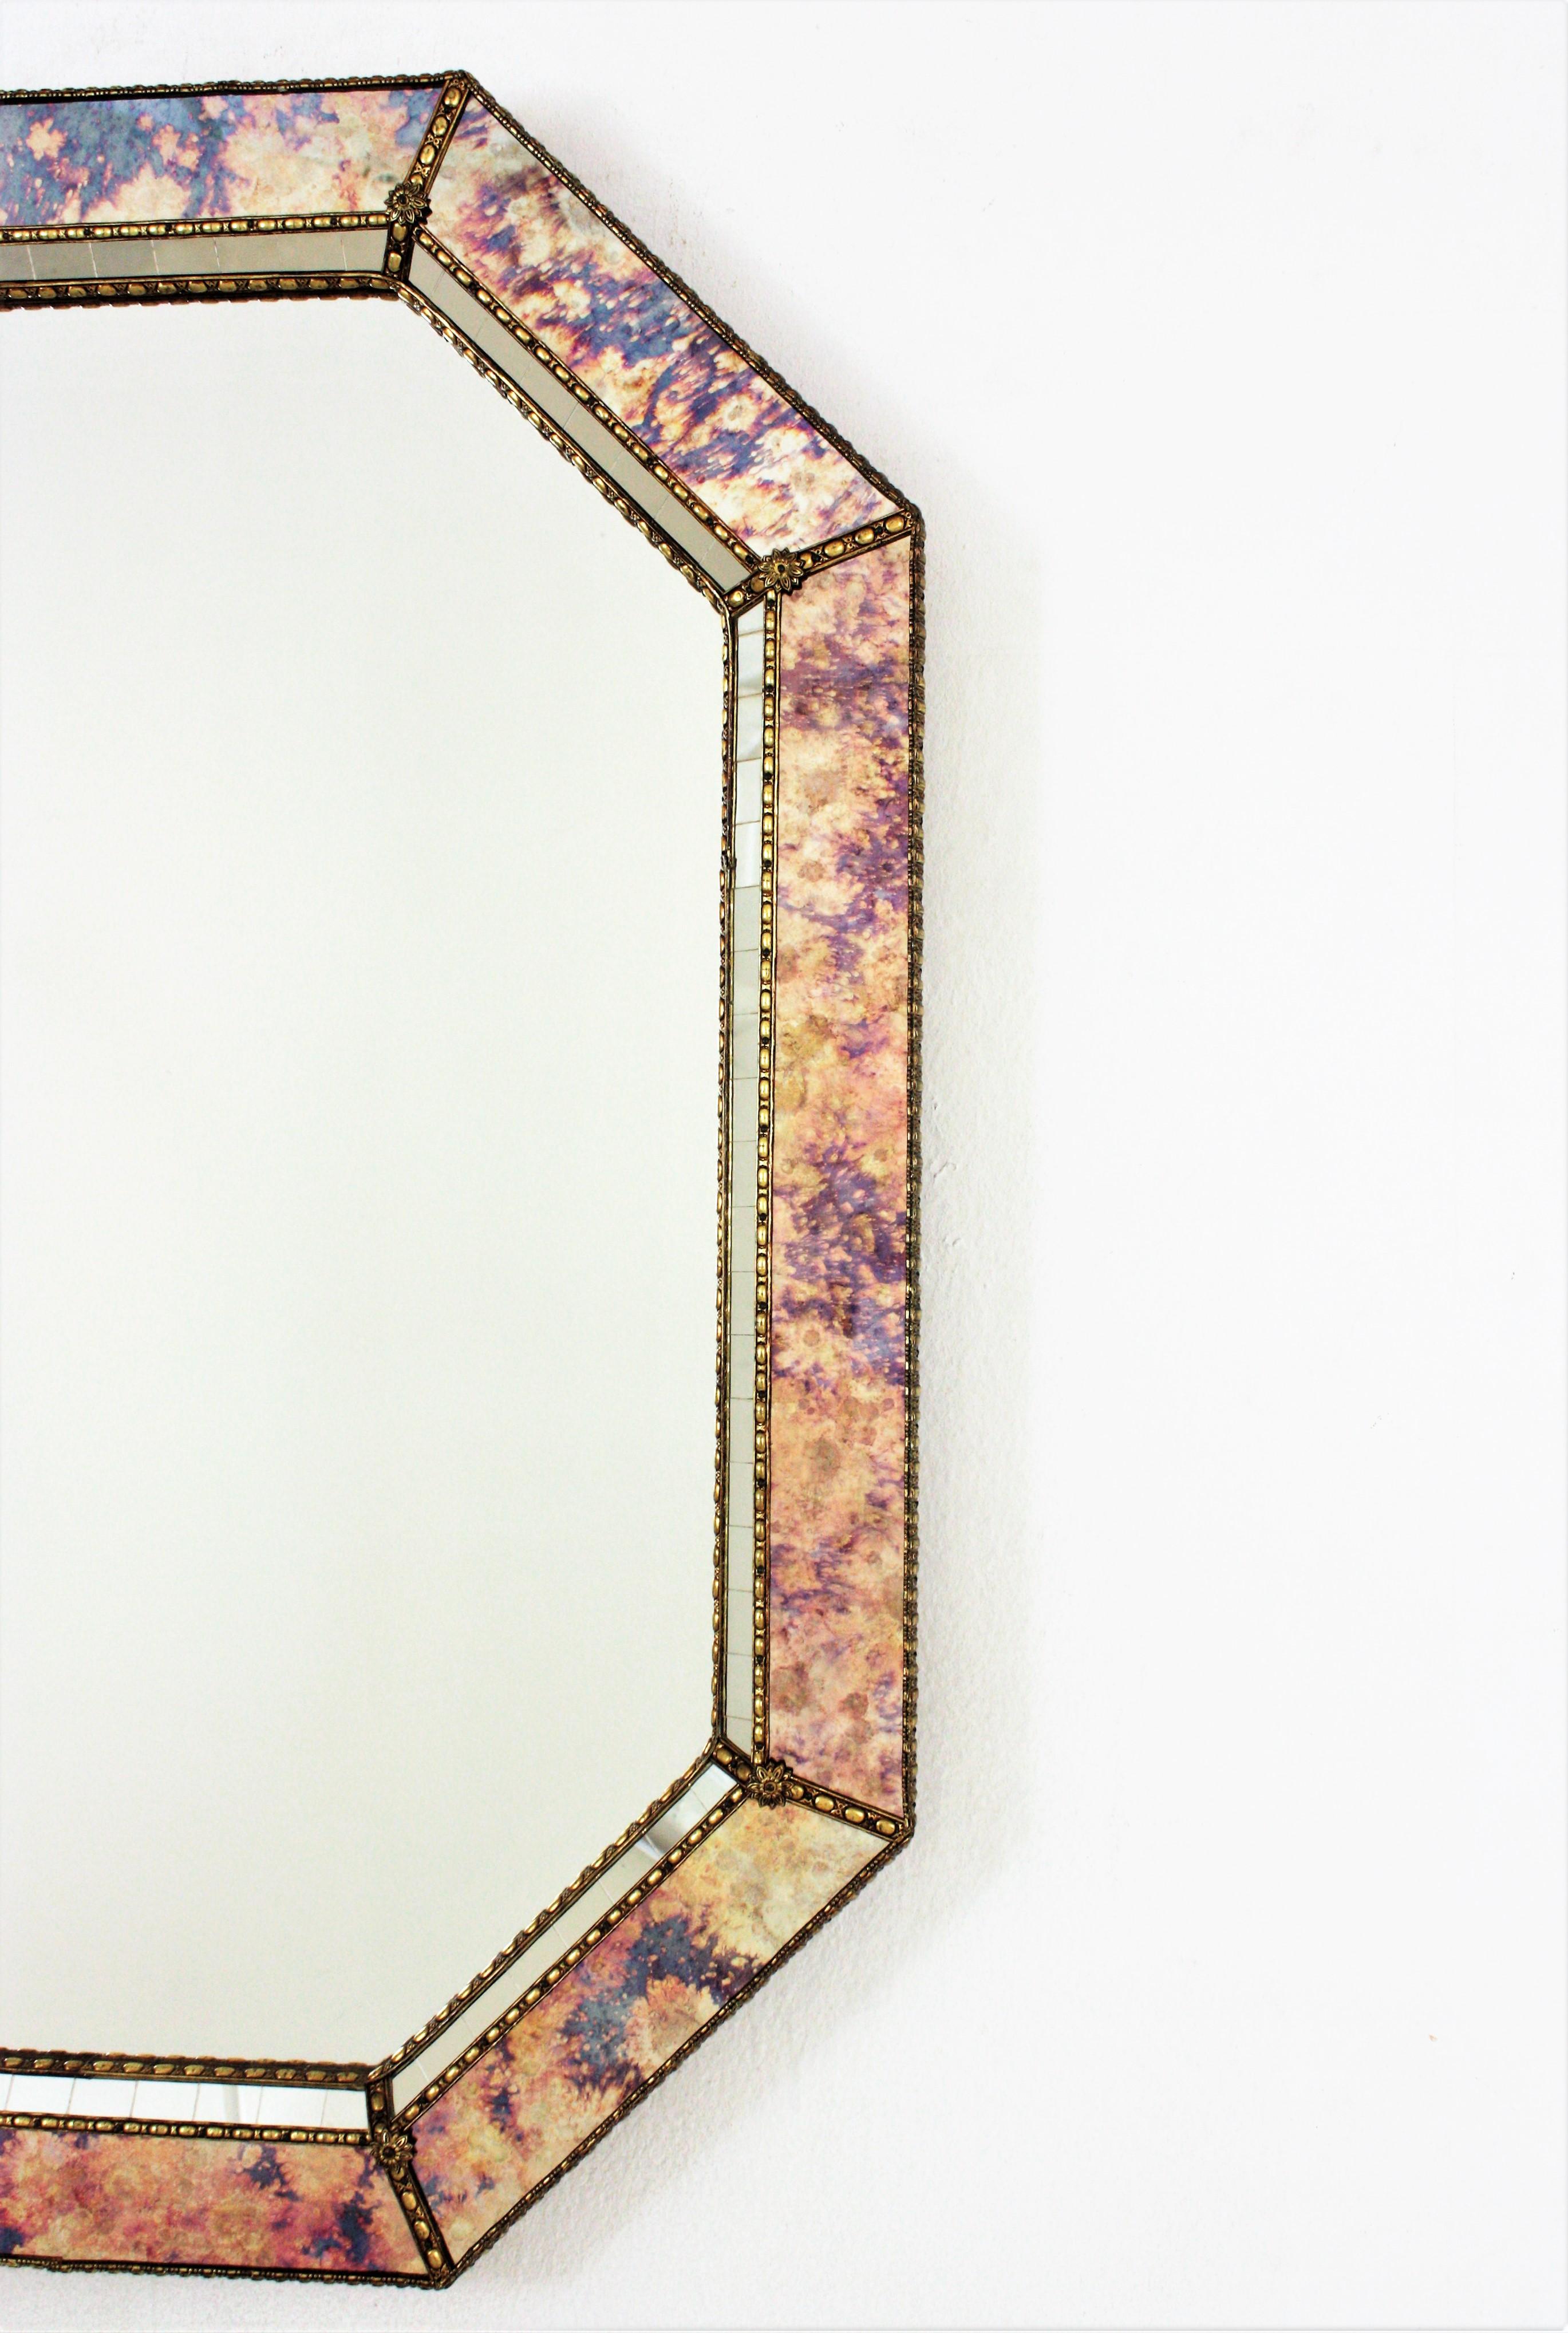 20th Century Octagonal Venetian Style Mirror with Iridiscent Pink Purple Glass & Brass Detail For Sale